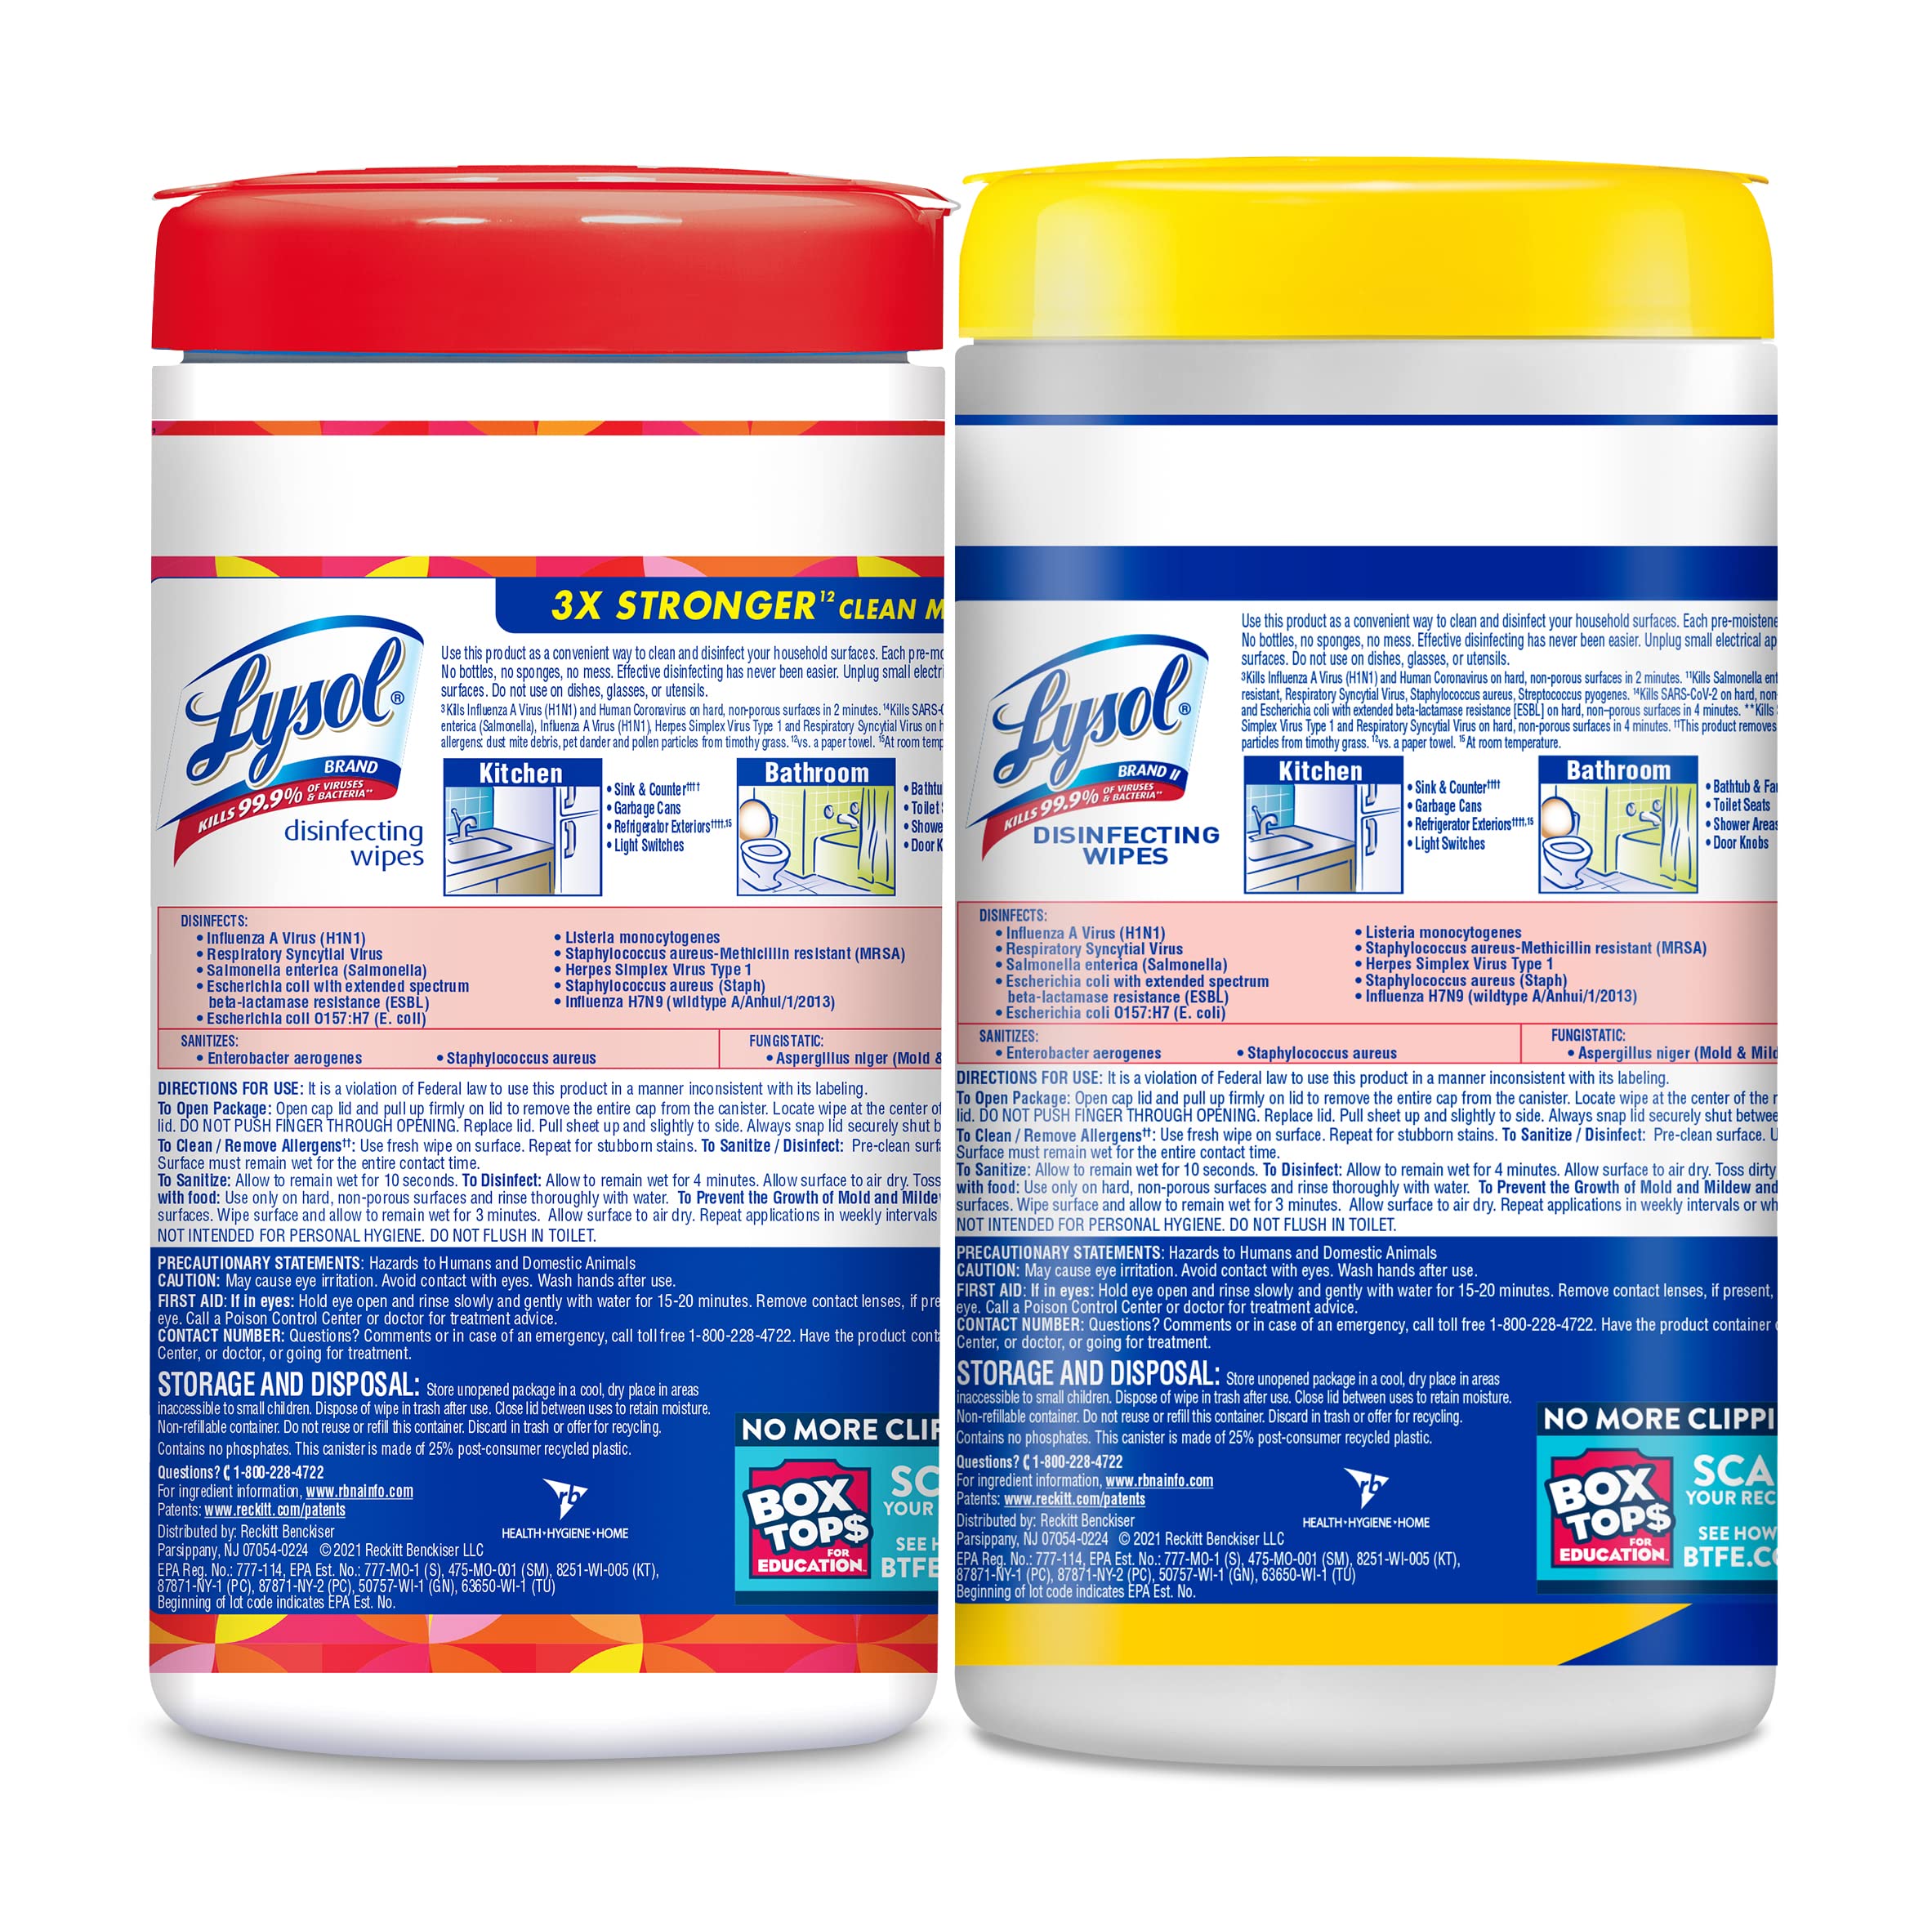 Lysol Disinfectant Wipes, Multi-Surface Antibacterial Wipes, Mixed Fragrance pack containing Lemon & Lime Blossom (2 Packs) and Mango and Hibiscus (1 Pack), 35 Count (Pack of 3)